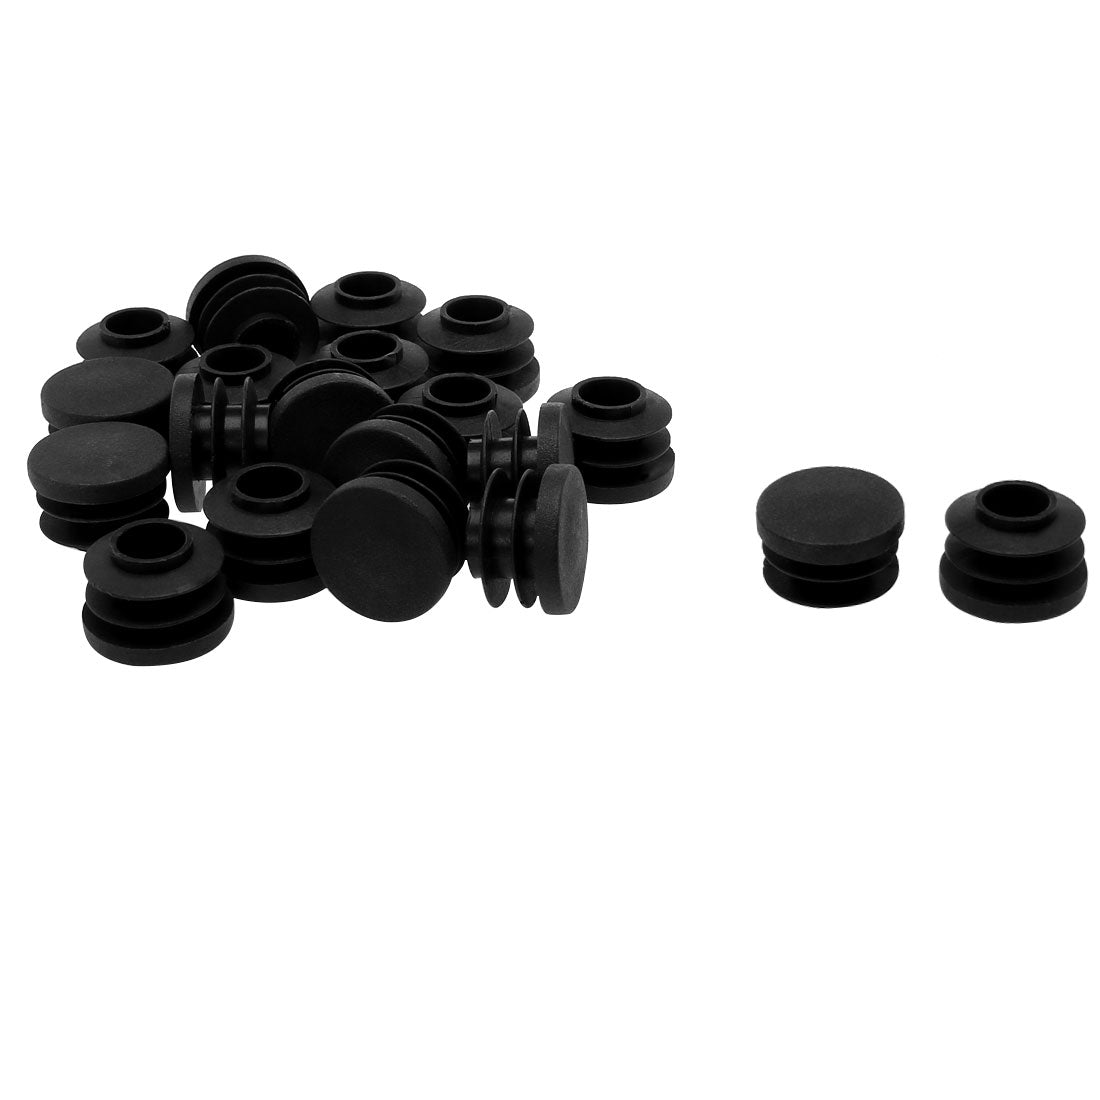 Uxcell Uxcell 3/4" 20mm OD Plastic Round Tube Ribbed Inserts End Cover Caps 20pcs, 0.67"-0.75" Inner Dia, Floor Furniture Chair Cabinet Protector